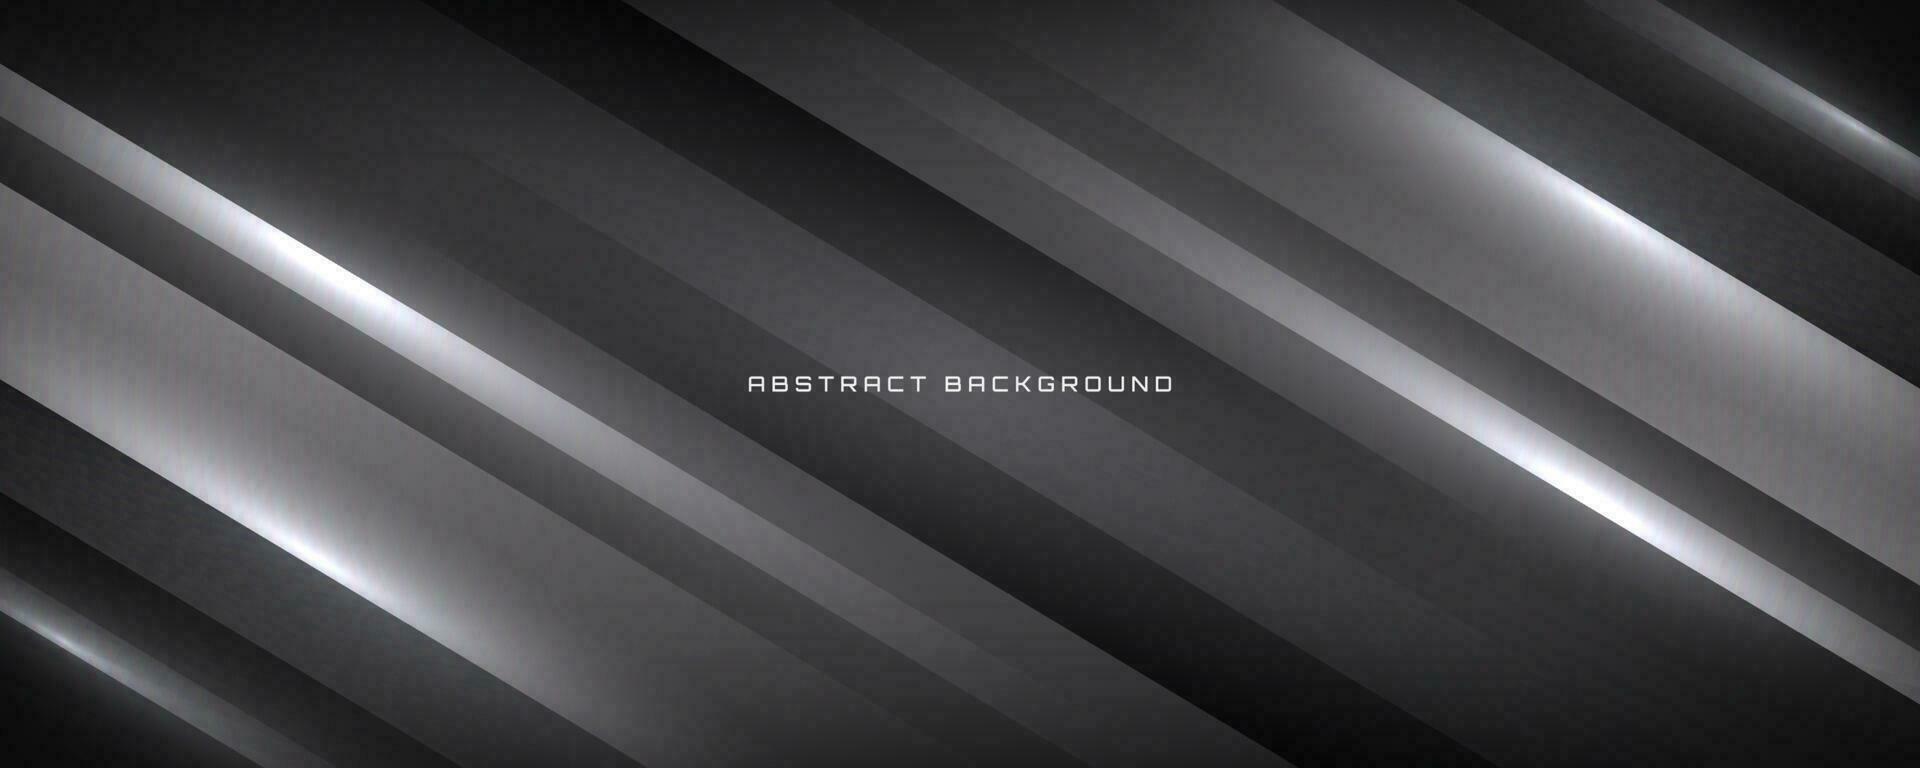 3D black white techno abstract background overlap layer on dark space with diagonal stripes decoration. Modern graphic design element cutout style concept for banner, flyer, card, or brochure cover vector